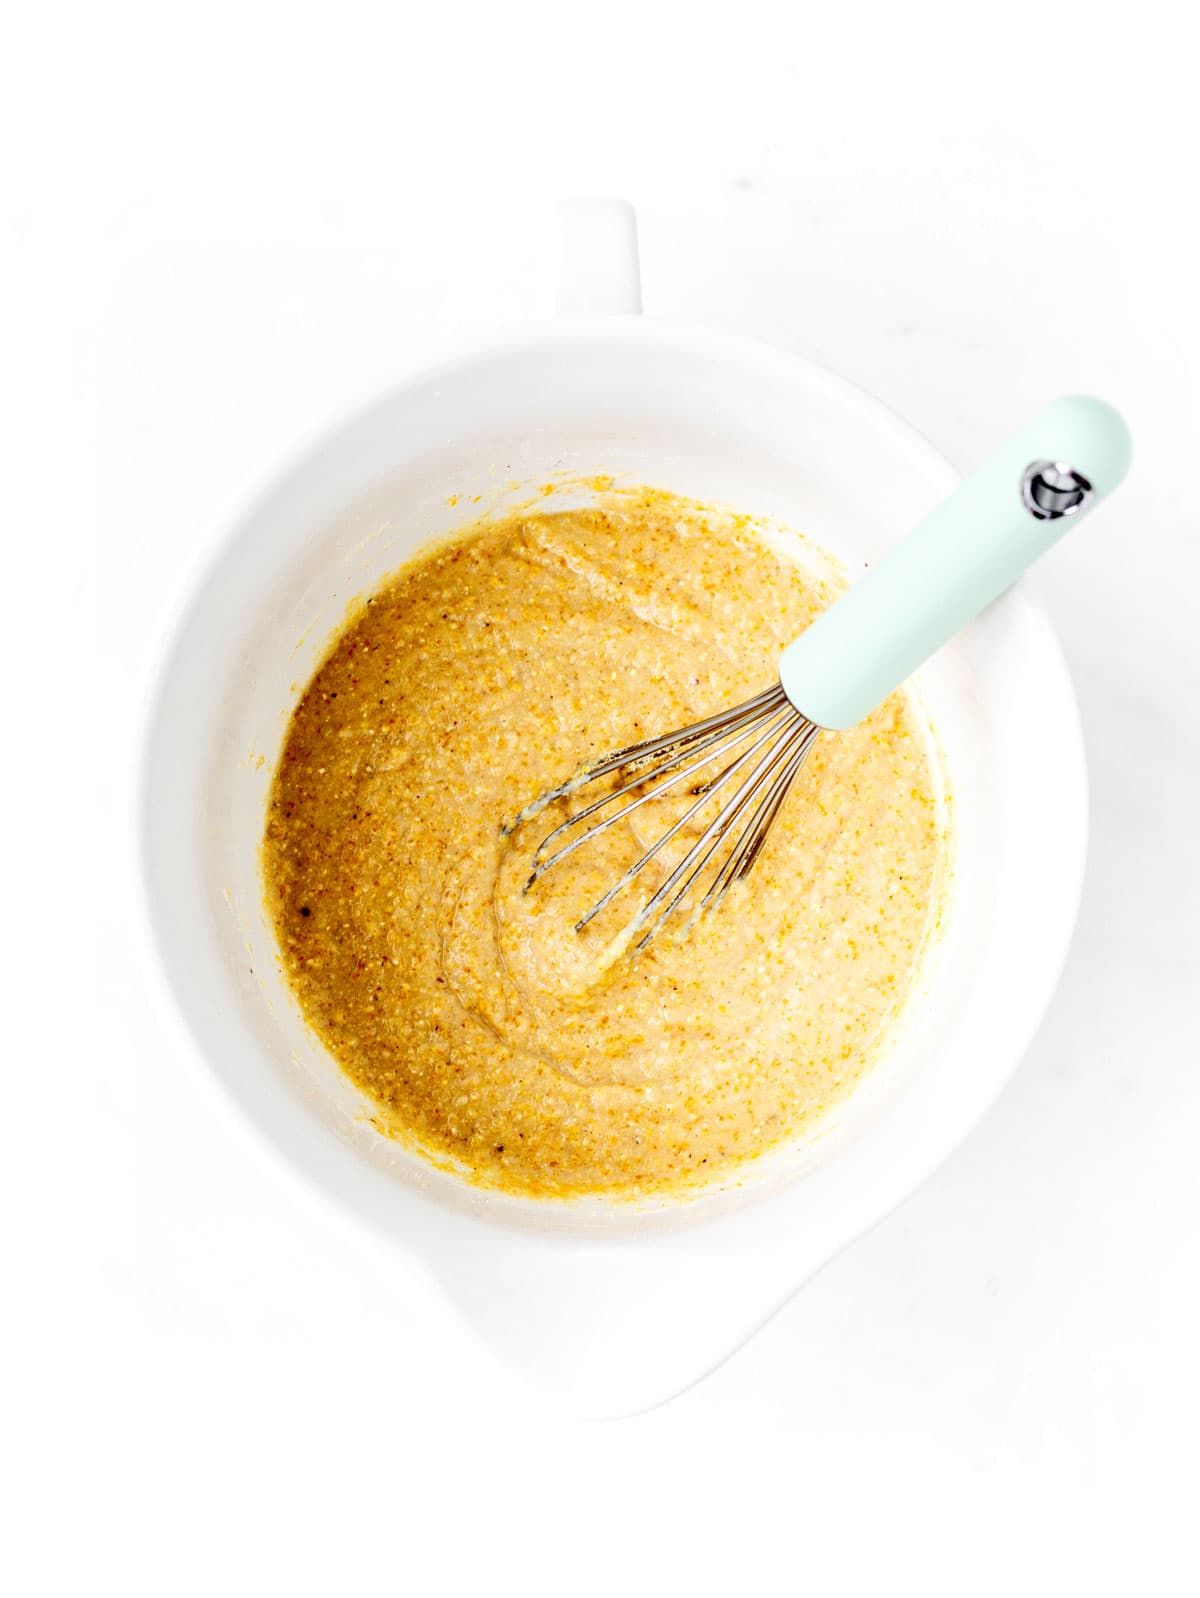 The cornbread muffin batter being whisked together in a white bowl.